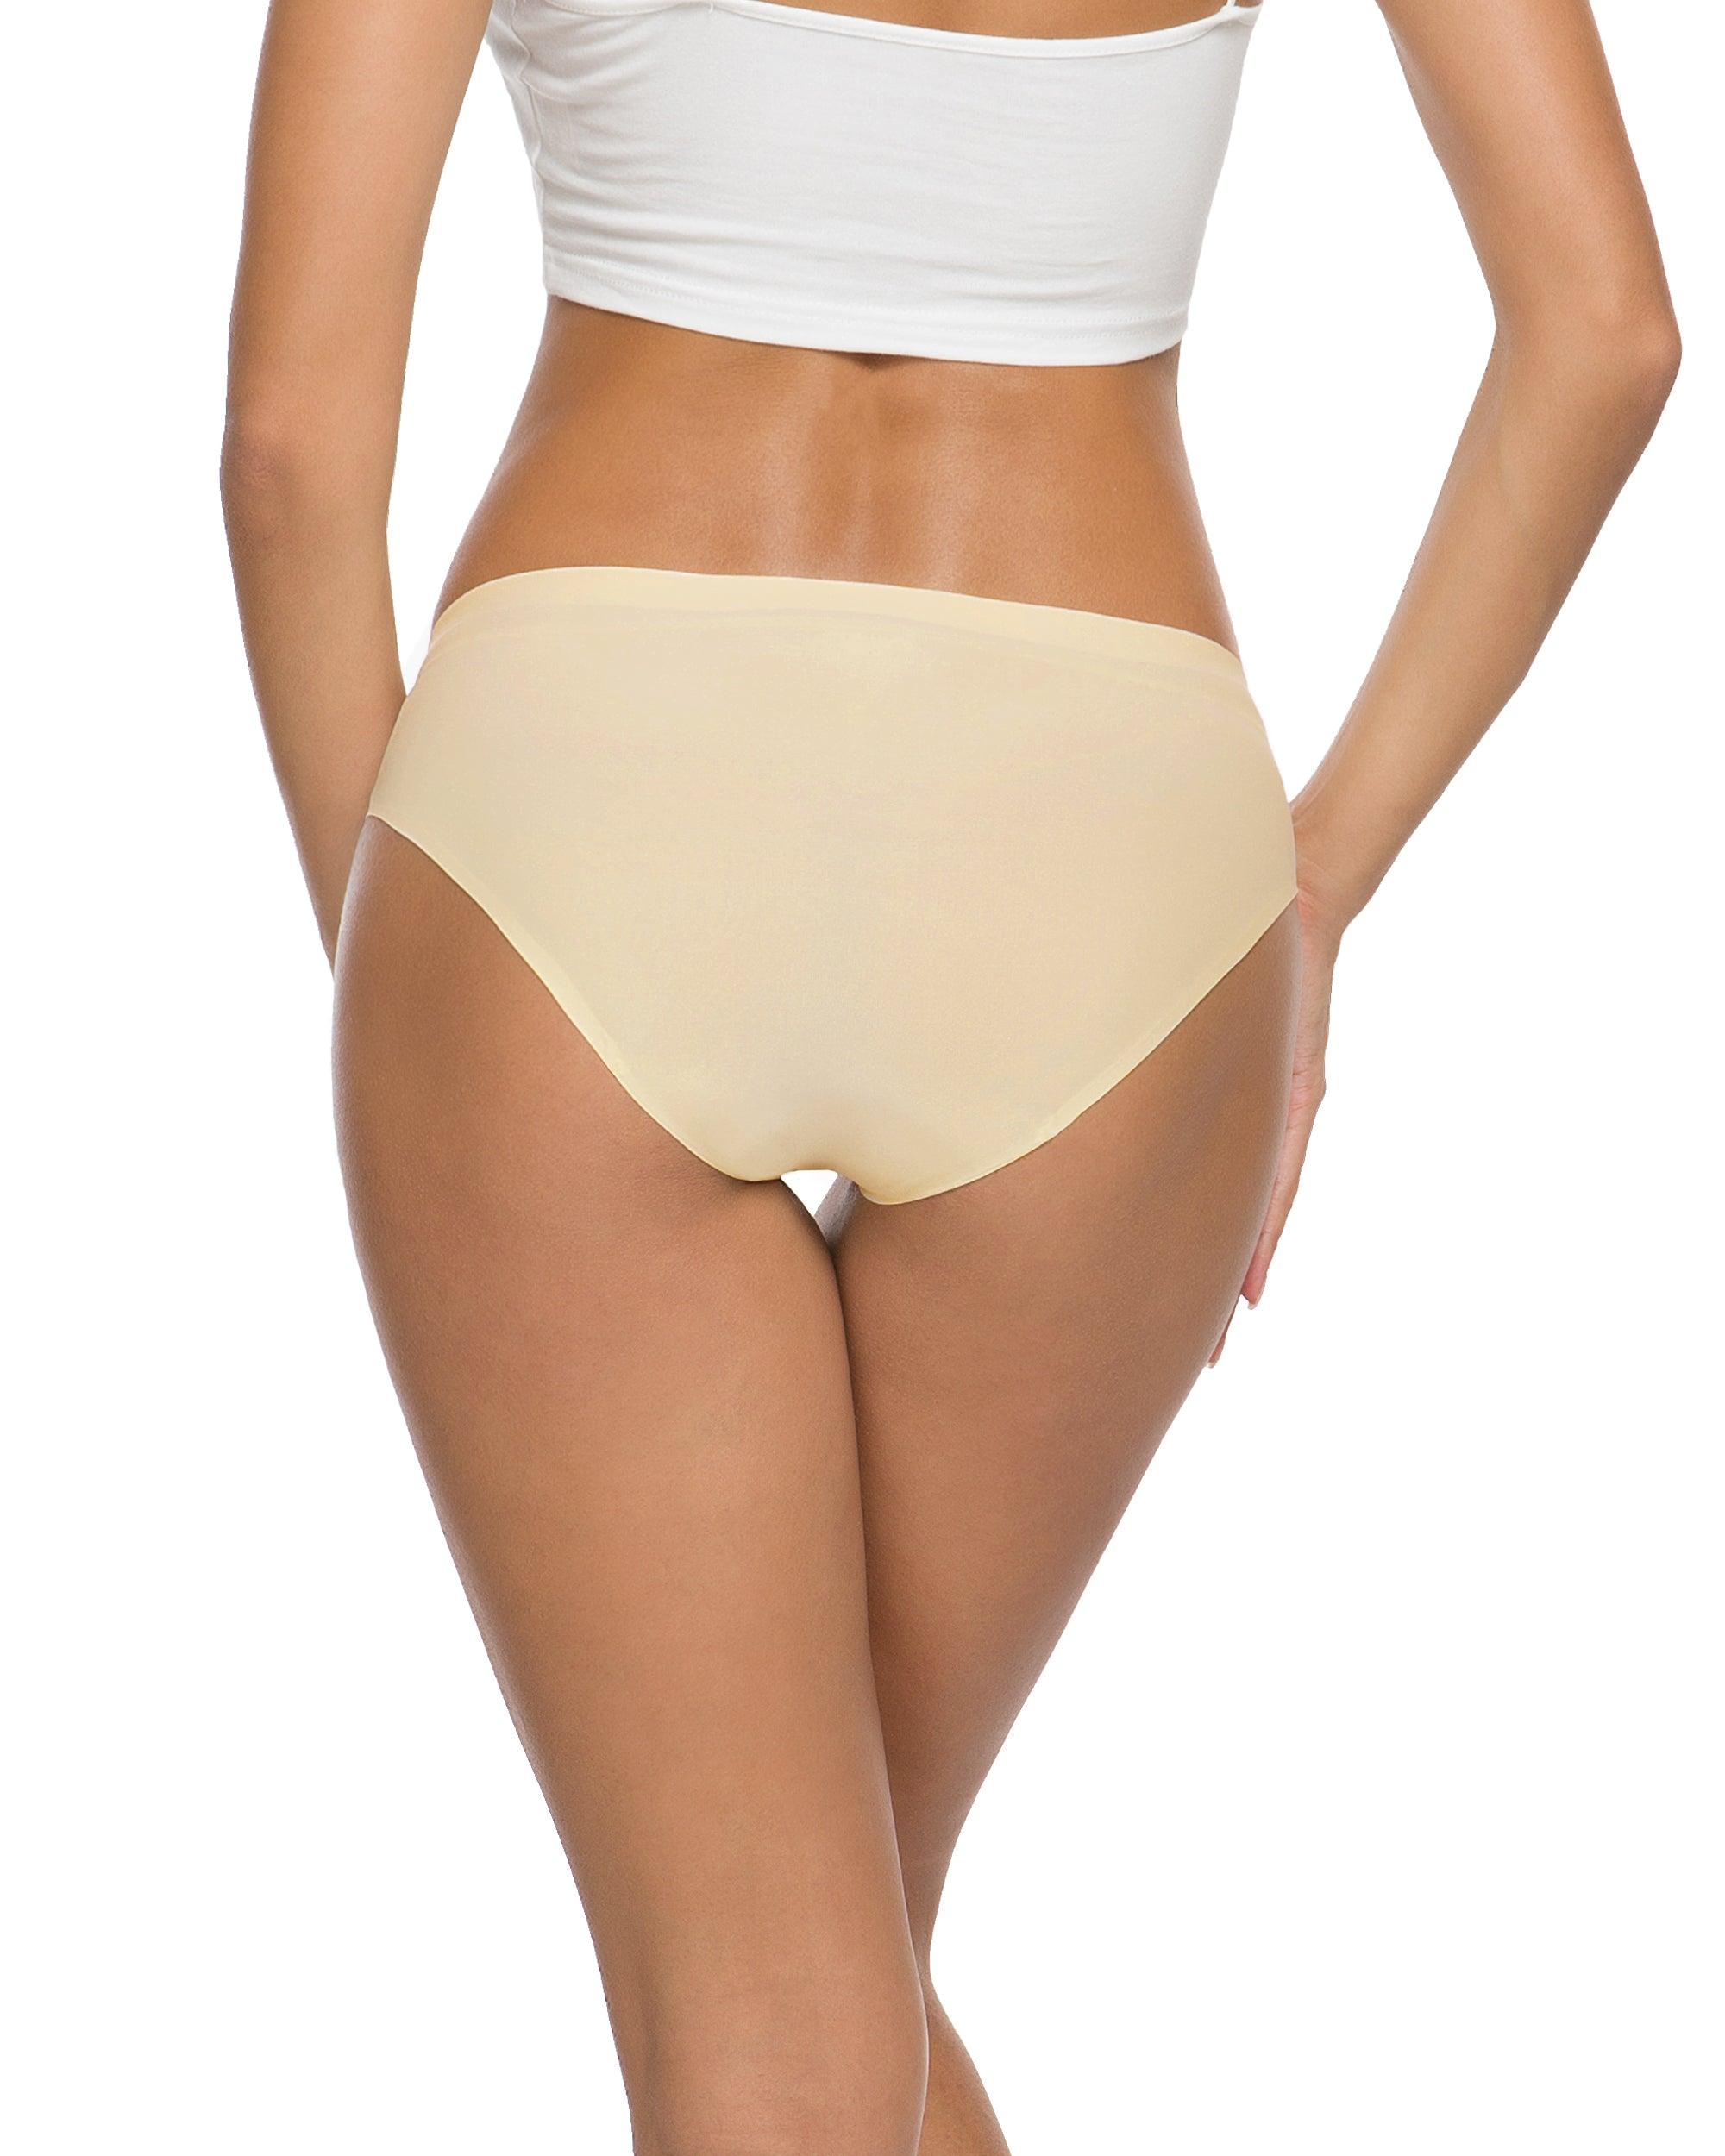 Altheanray Women's Seamless Underwear No Show Panties Soft - Import It All